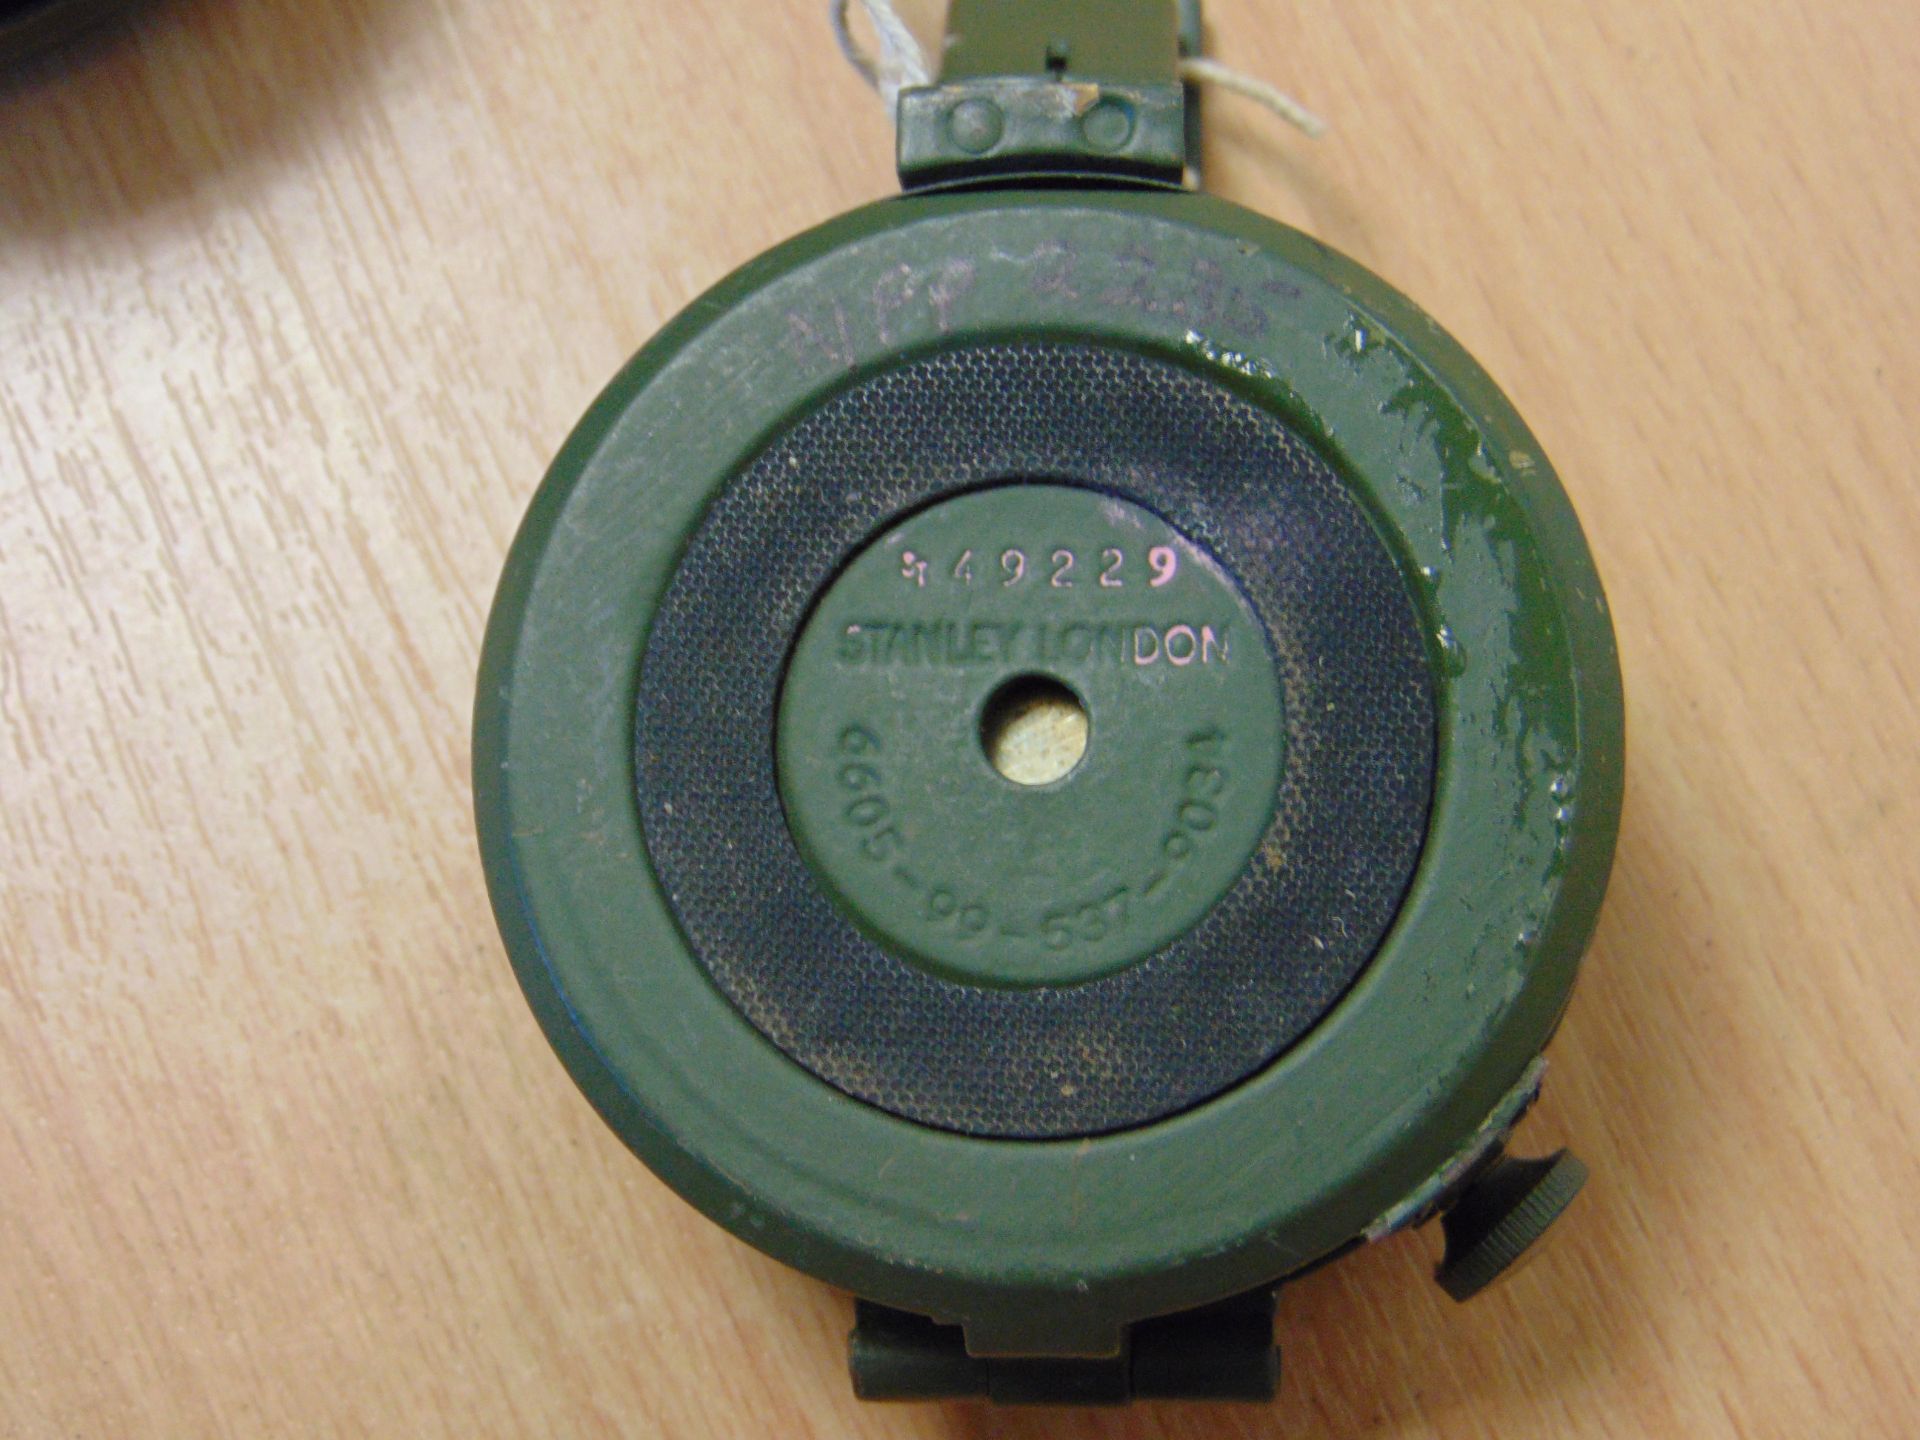 2X STANLEY BRITISH ARMY PRISMATIC COMPASS NATO MARKED - Image 3 of 8